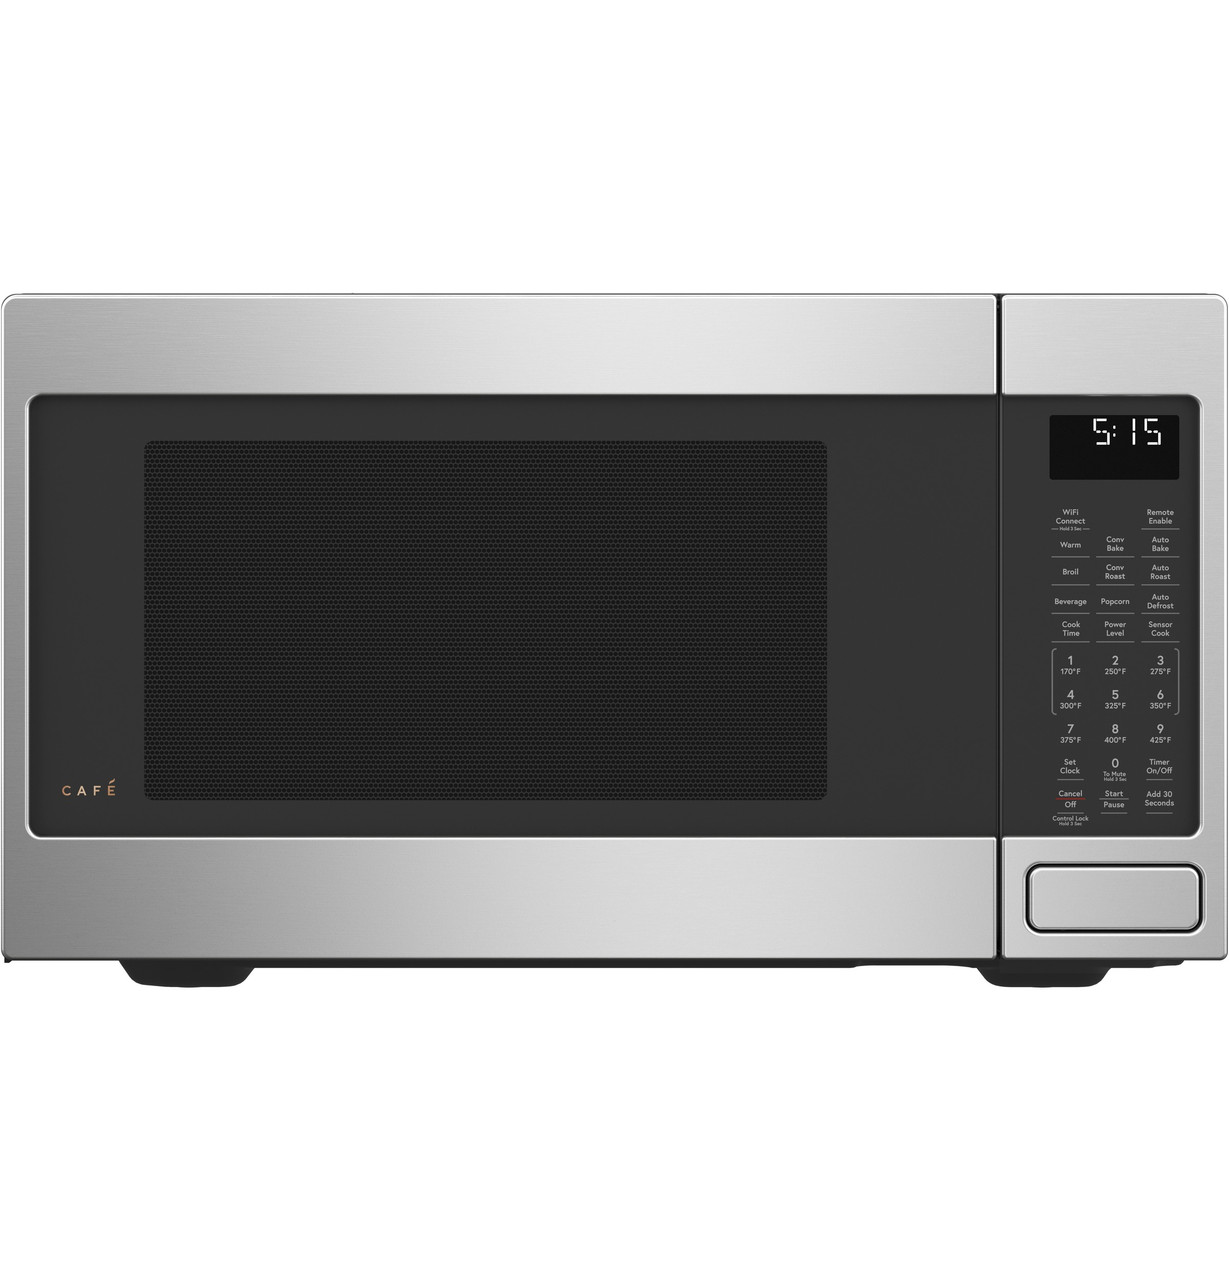 Top 5 Best Portable Microwave Review in 2023